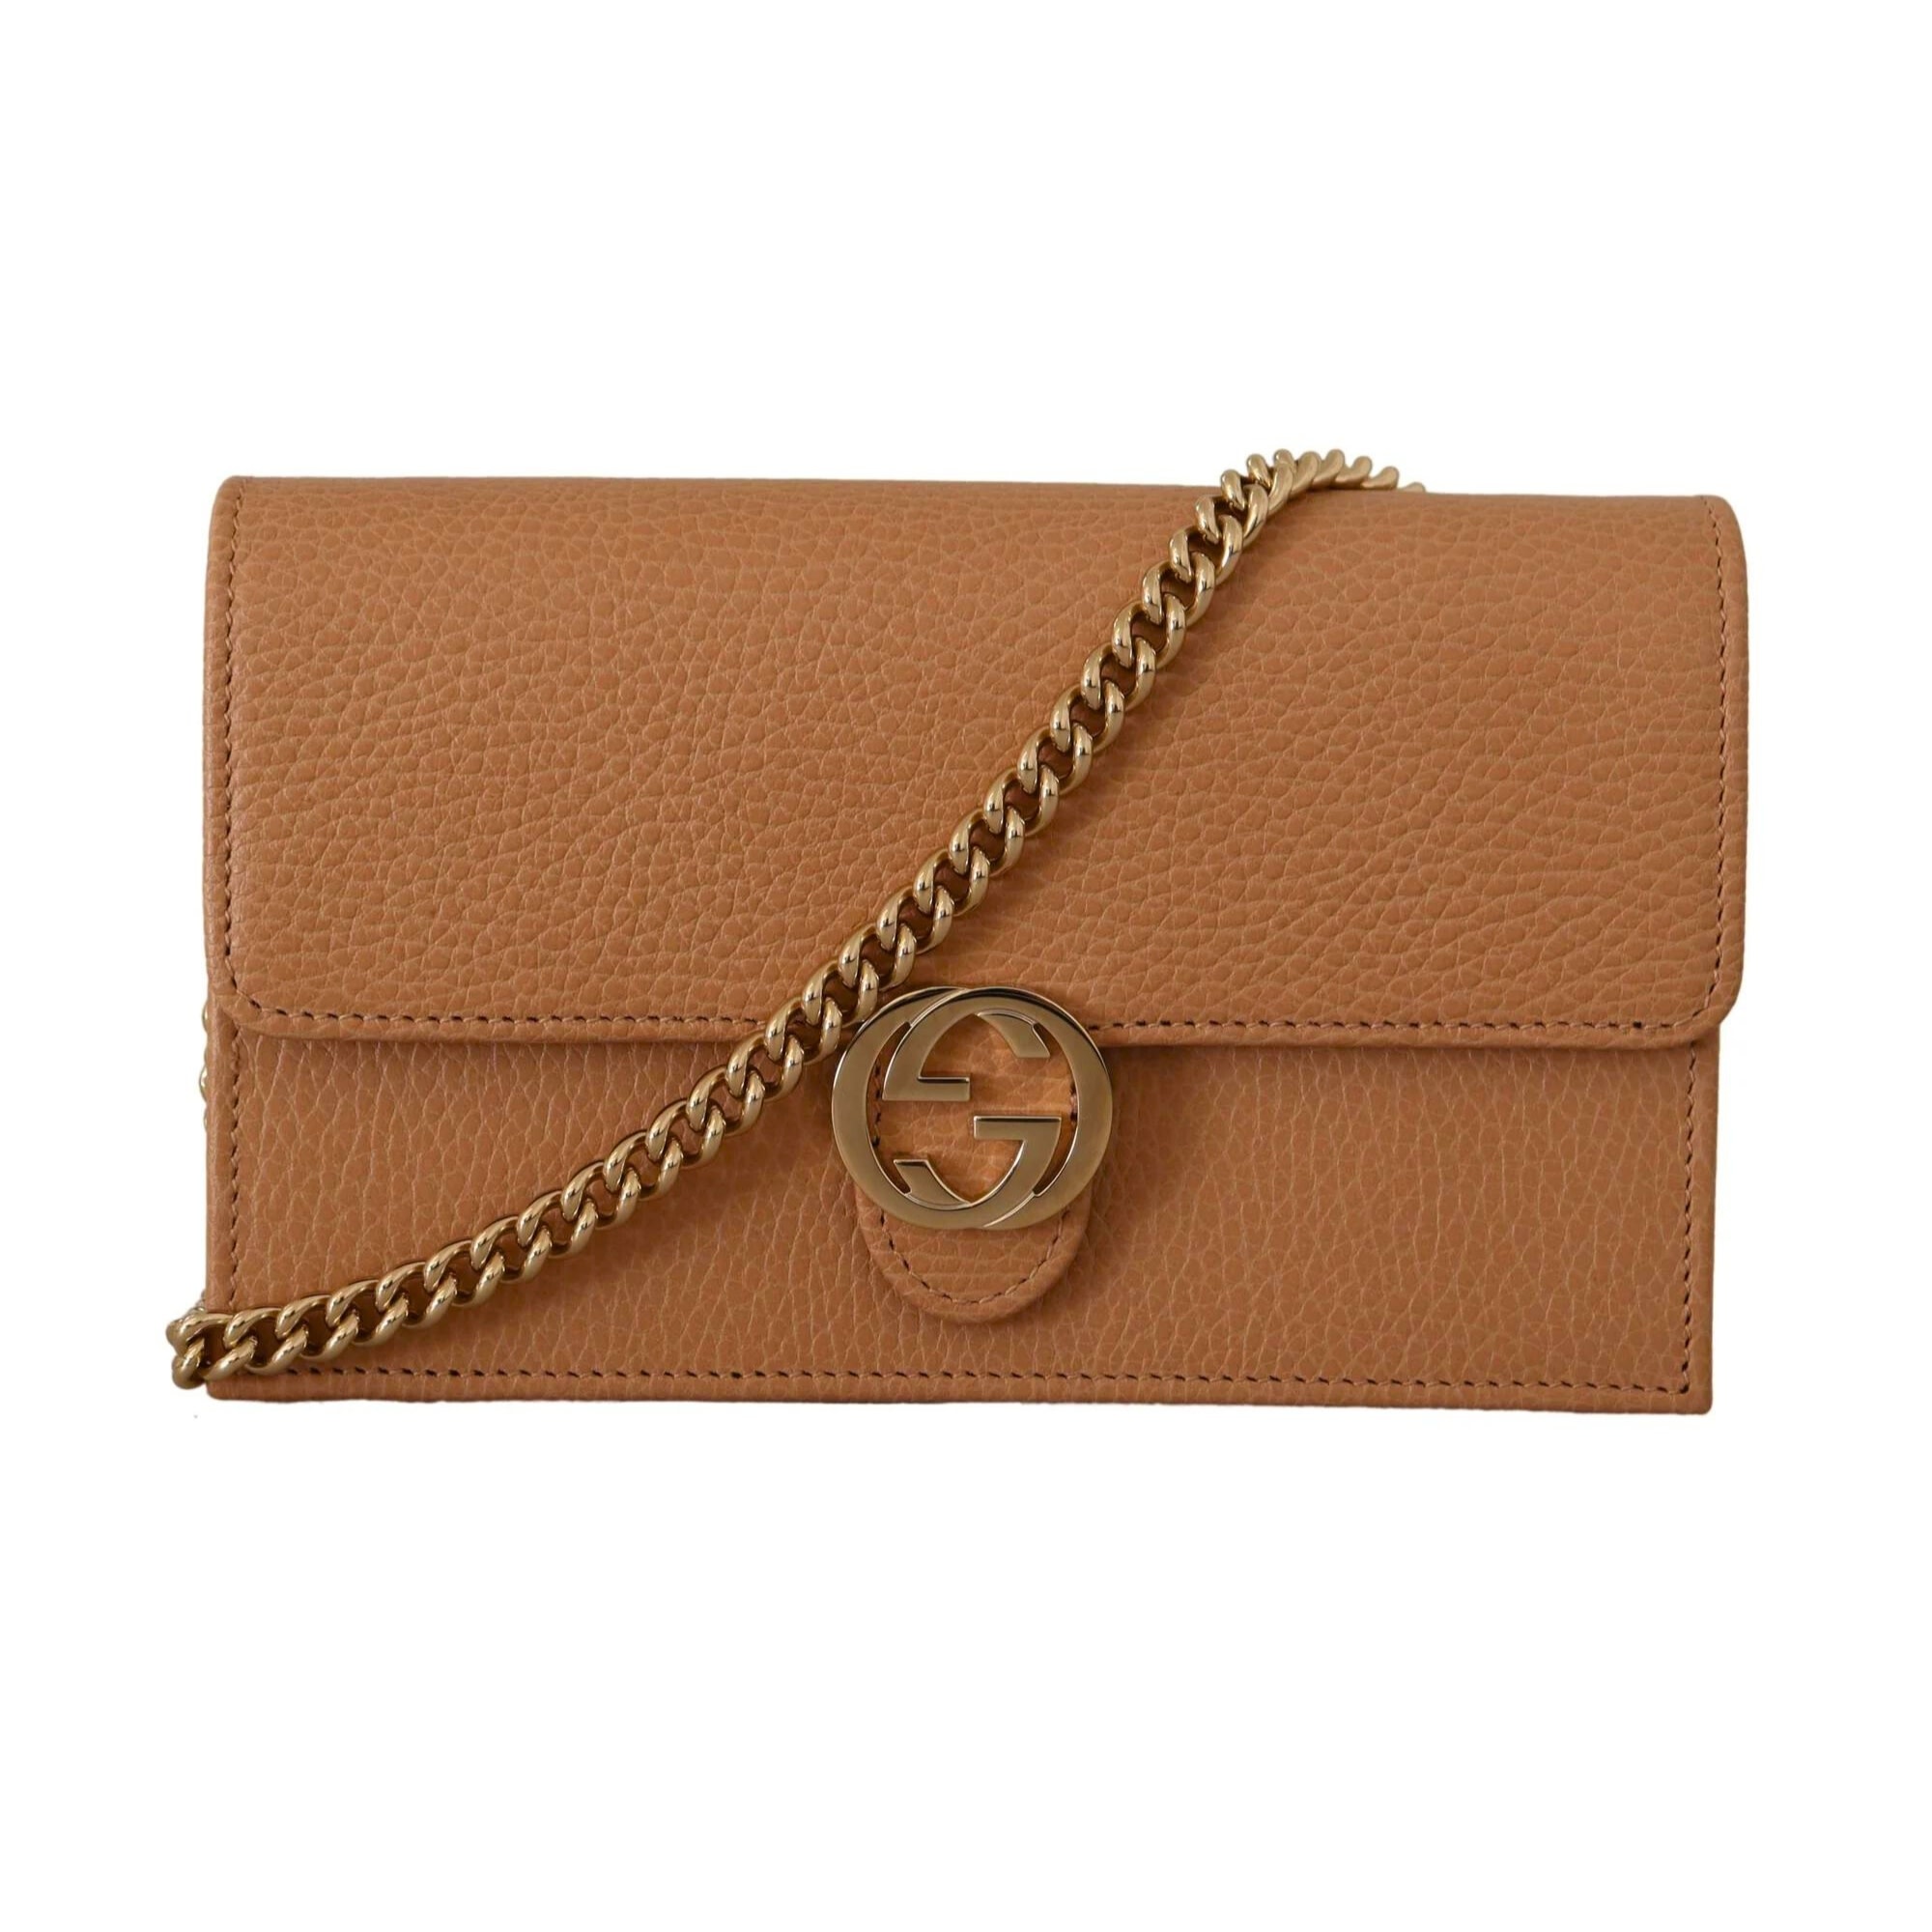 GUCCI: Wallet woman - Beige | GUCCI wallet 701070AACFE online at GIGLIO.COM